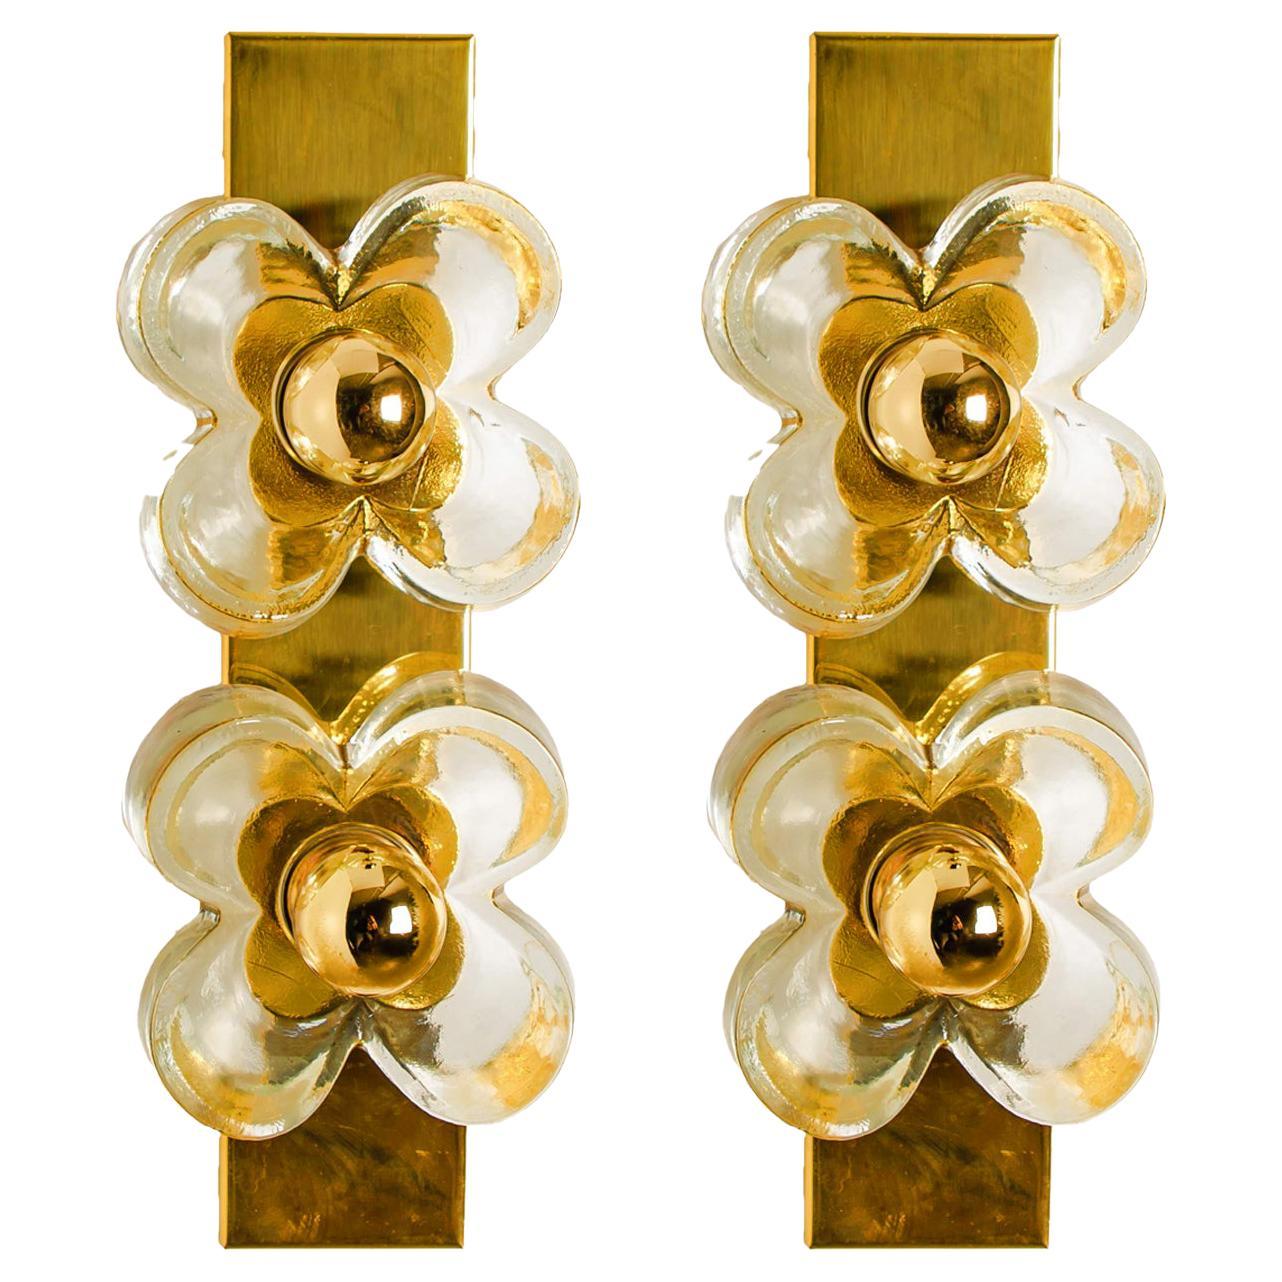 Pair of flower wall lights, brass and glass by Sische Lighting, circa 1970s, Germany. Each of these wall lights is composed of two glass flowers shade screwed through round metal rings to a square brass base. High end pieces from the 20th century.